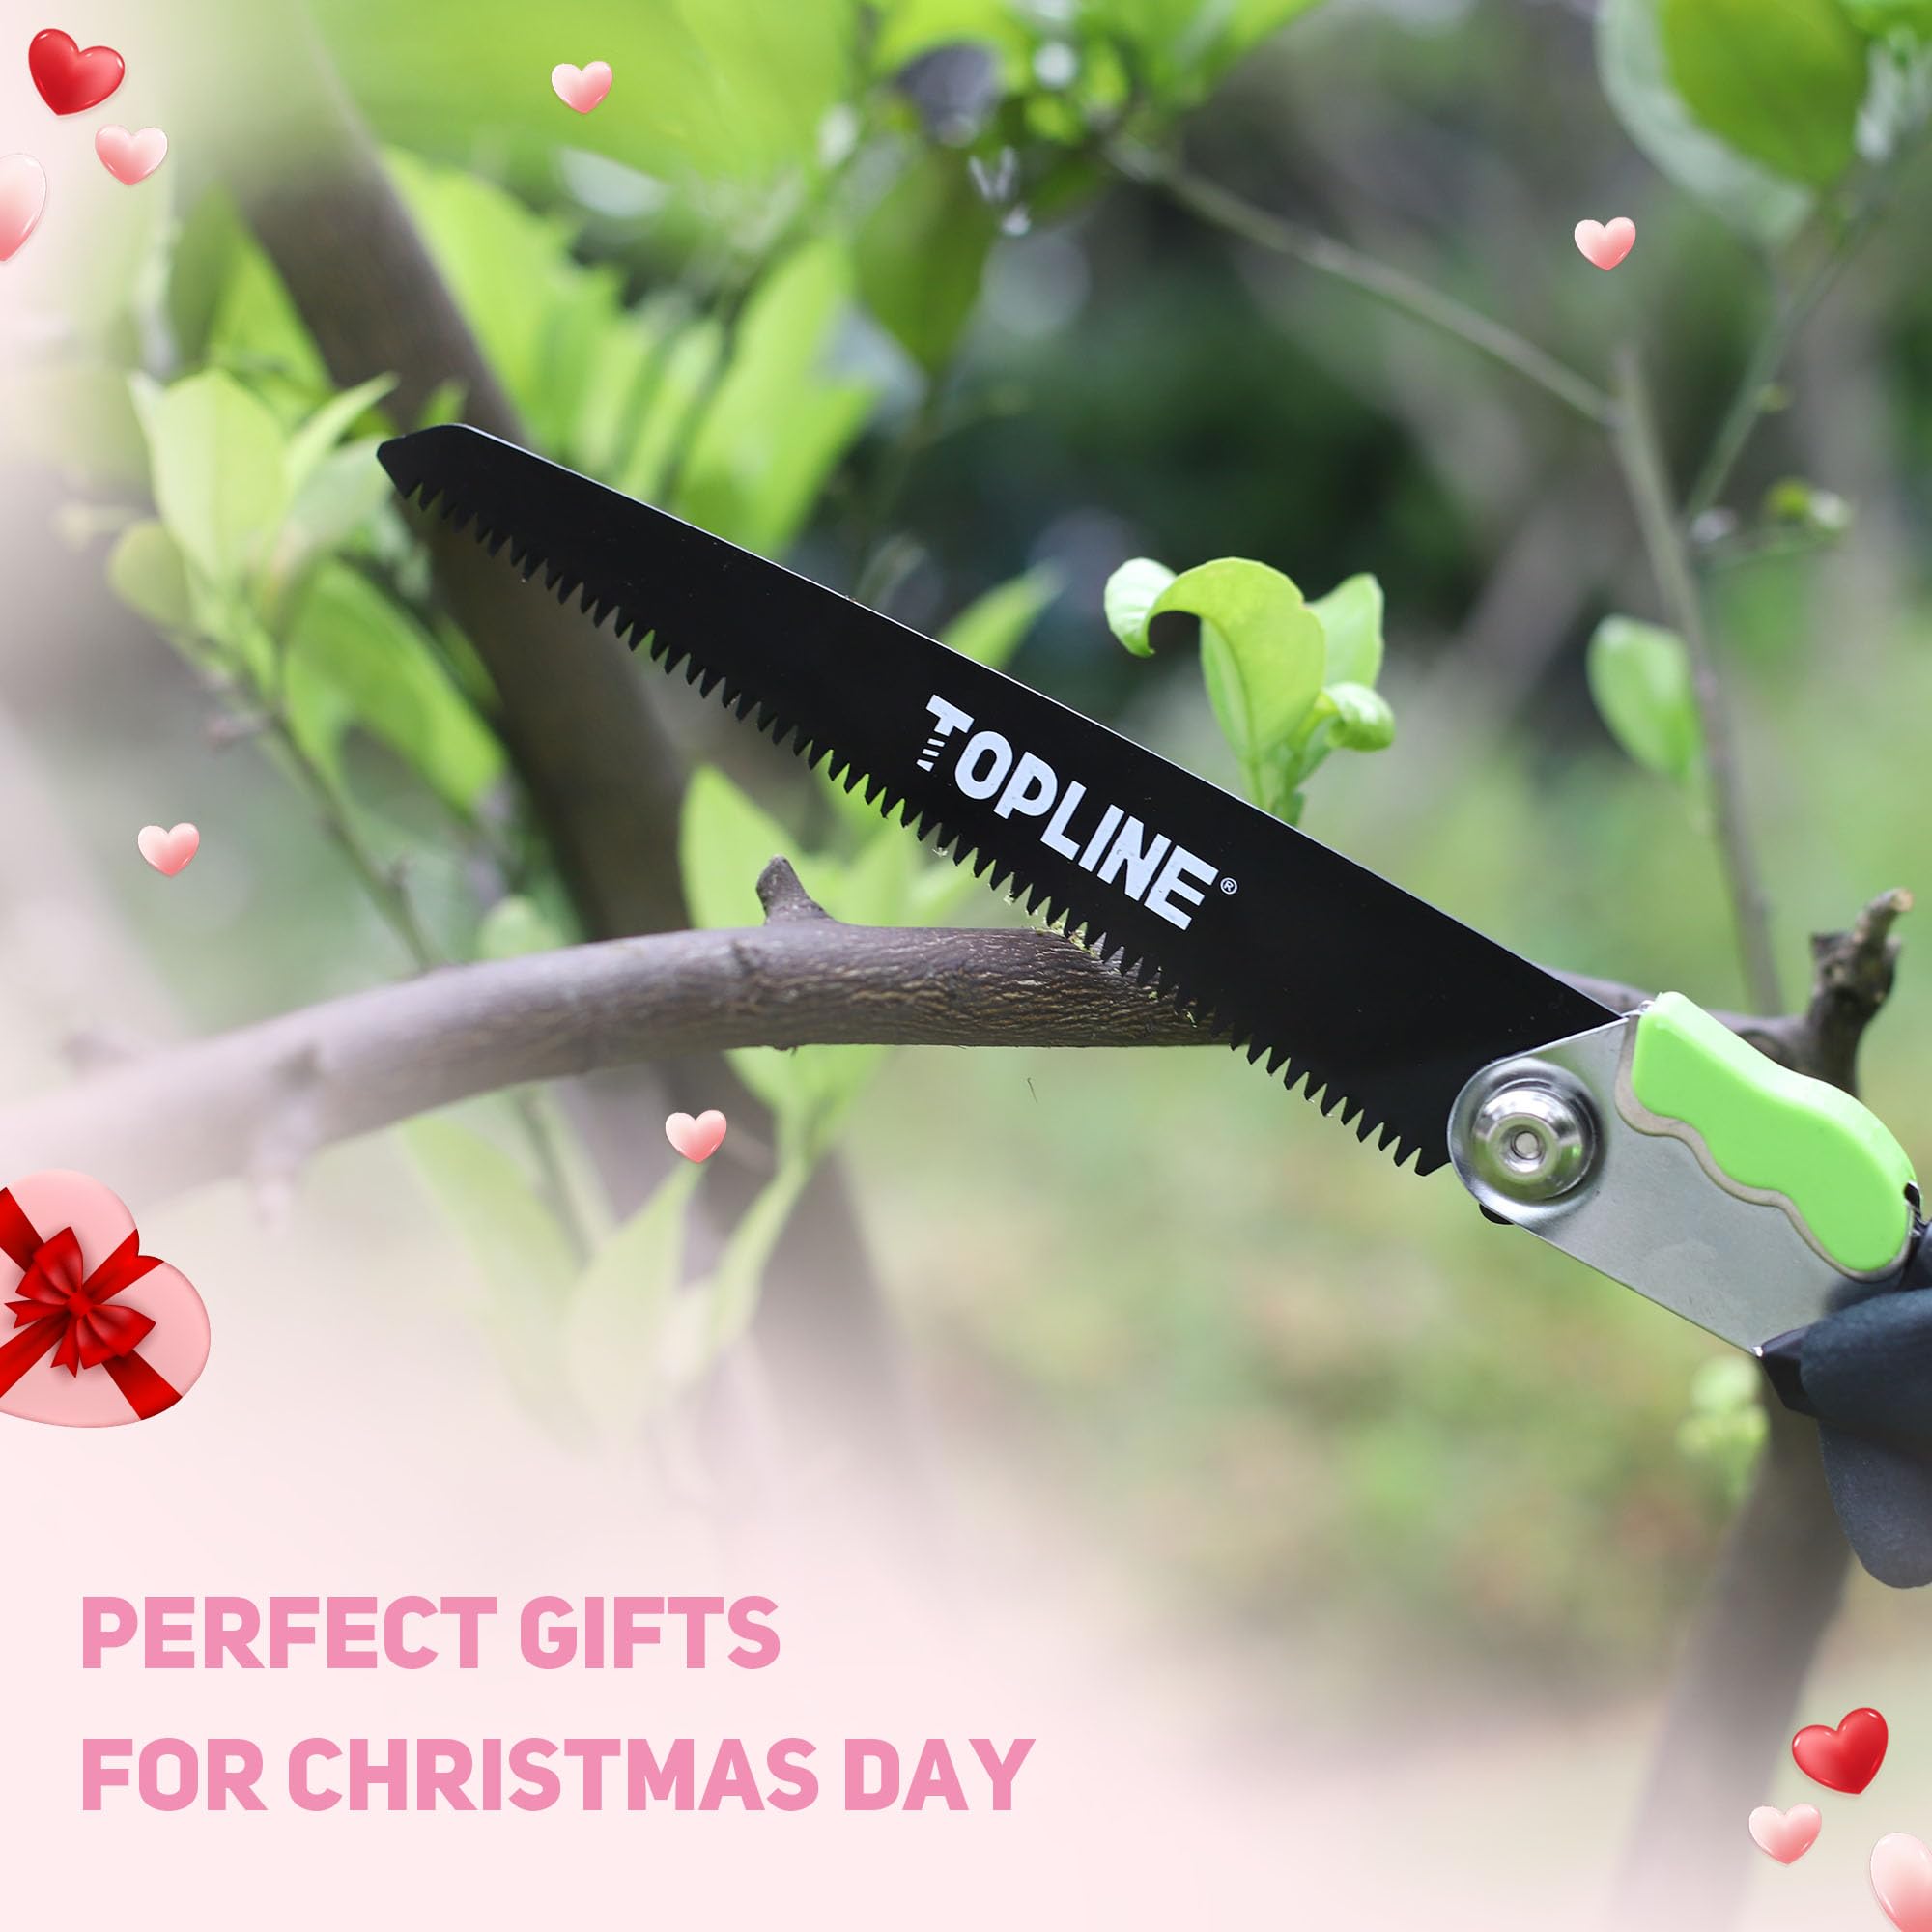 TOPLINE 3-In-1Folding Hand Saw Kit, Tree Saw with 8-Inch Long Blade Included, Hand Pruning Saws with Triple Bevel Teeth, Garden Saw for Wood Cutting, Trees Purning, Camping, Portable Pouch Included